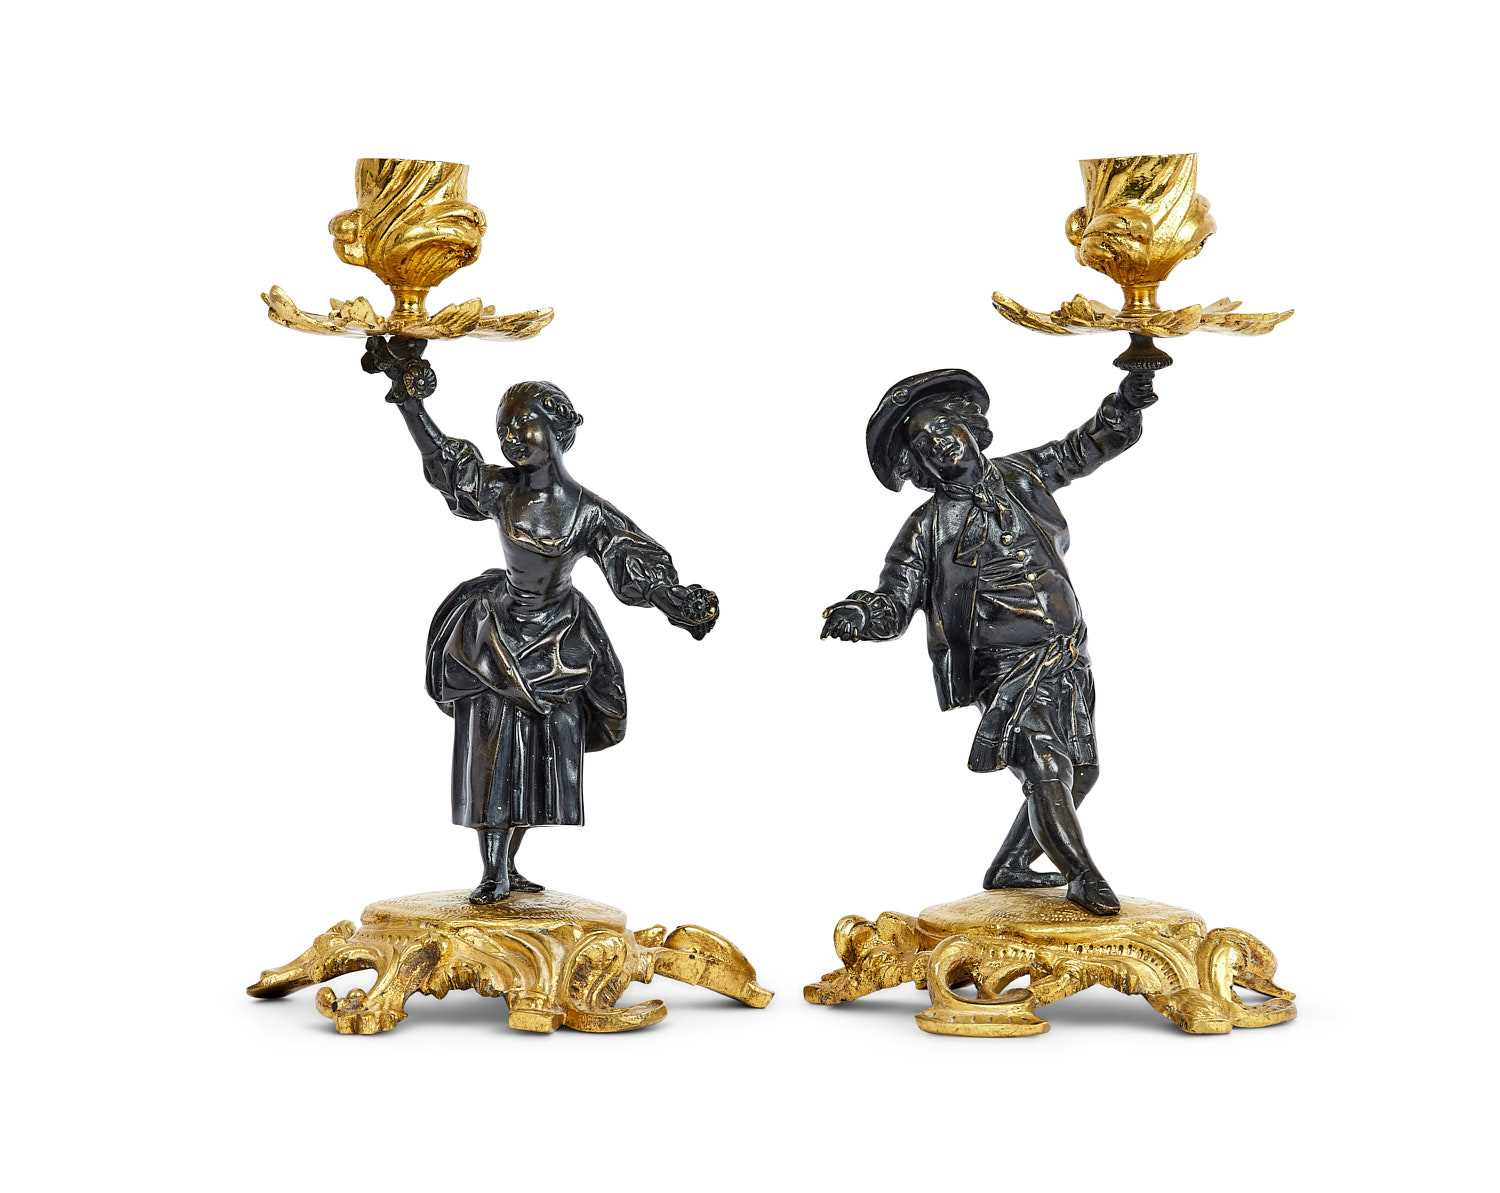 A PAIR OF ROCOCO REVIVAL GILT AND PATINATED BRONZE FIGURAL CANDLESTICKS CIRCA 1830